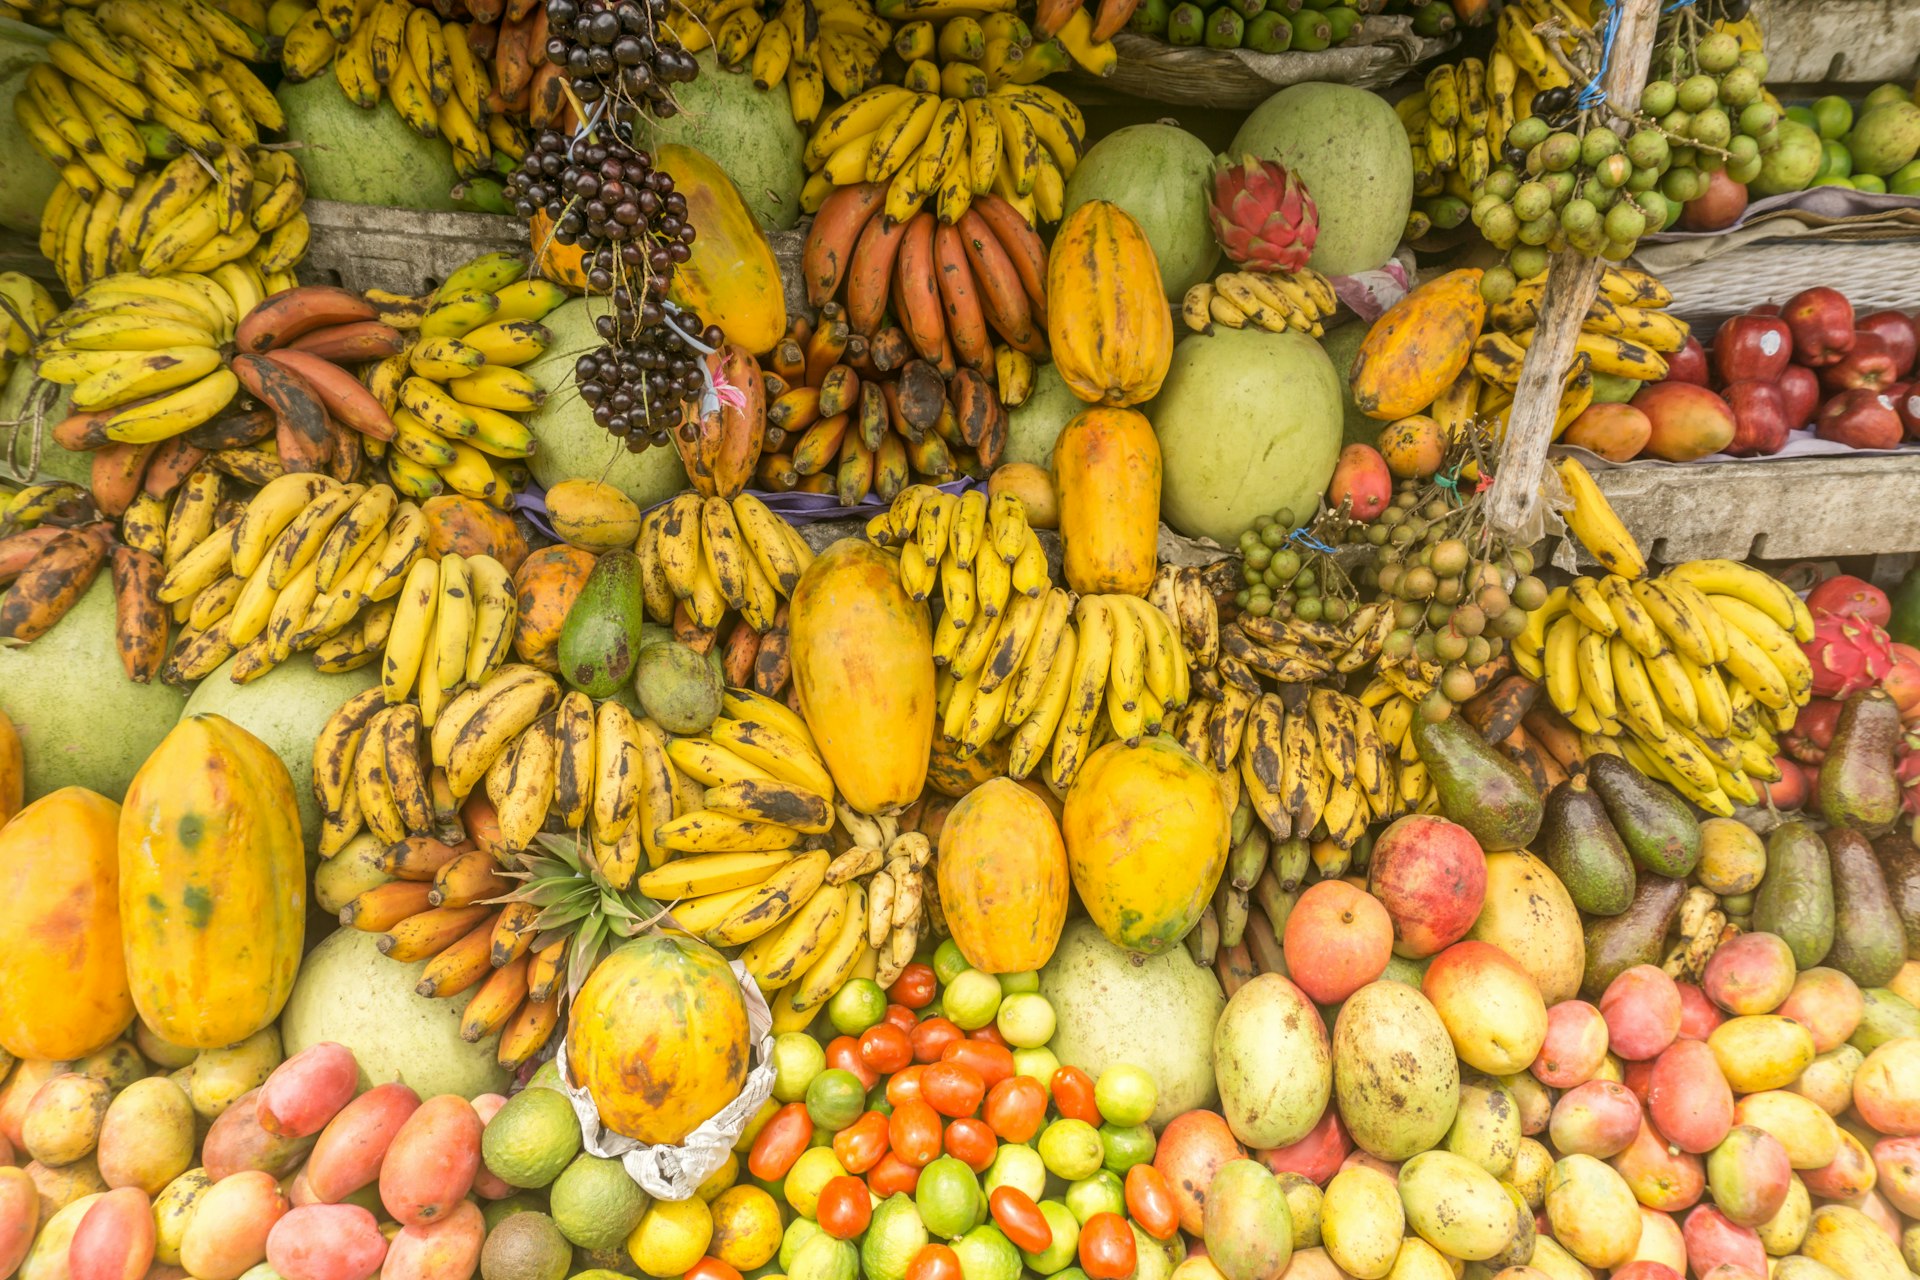 Many different colourful fruits piled together in a marketplace